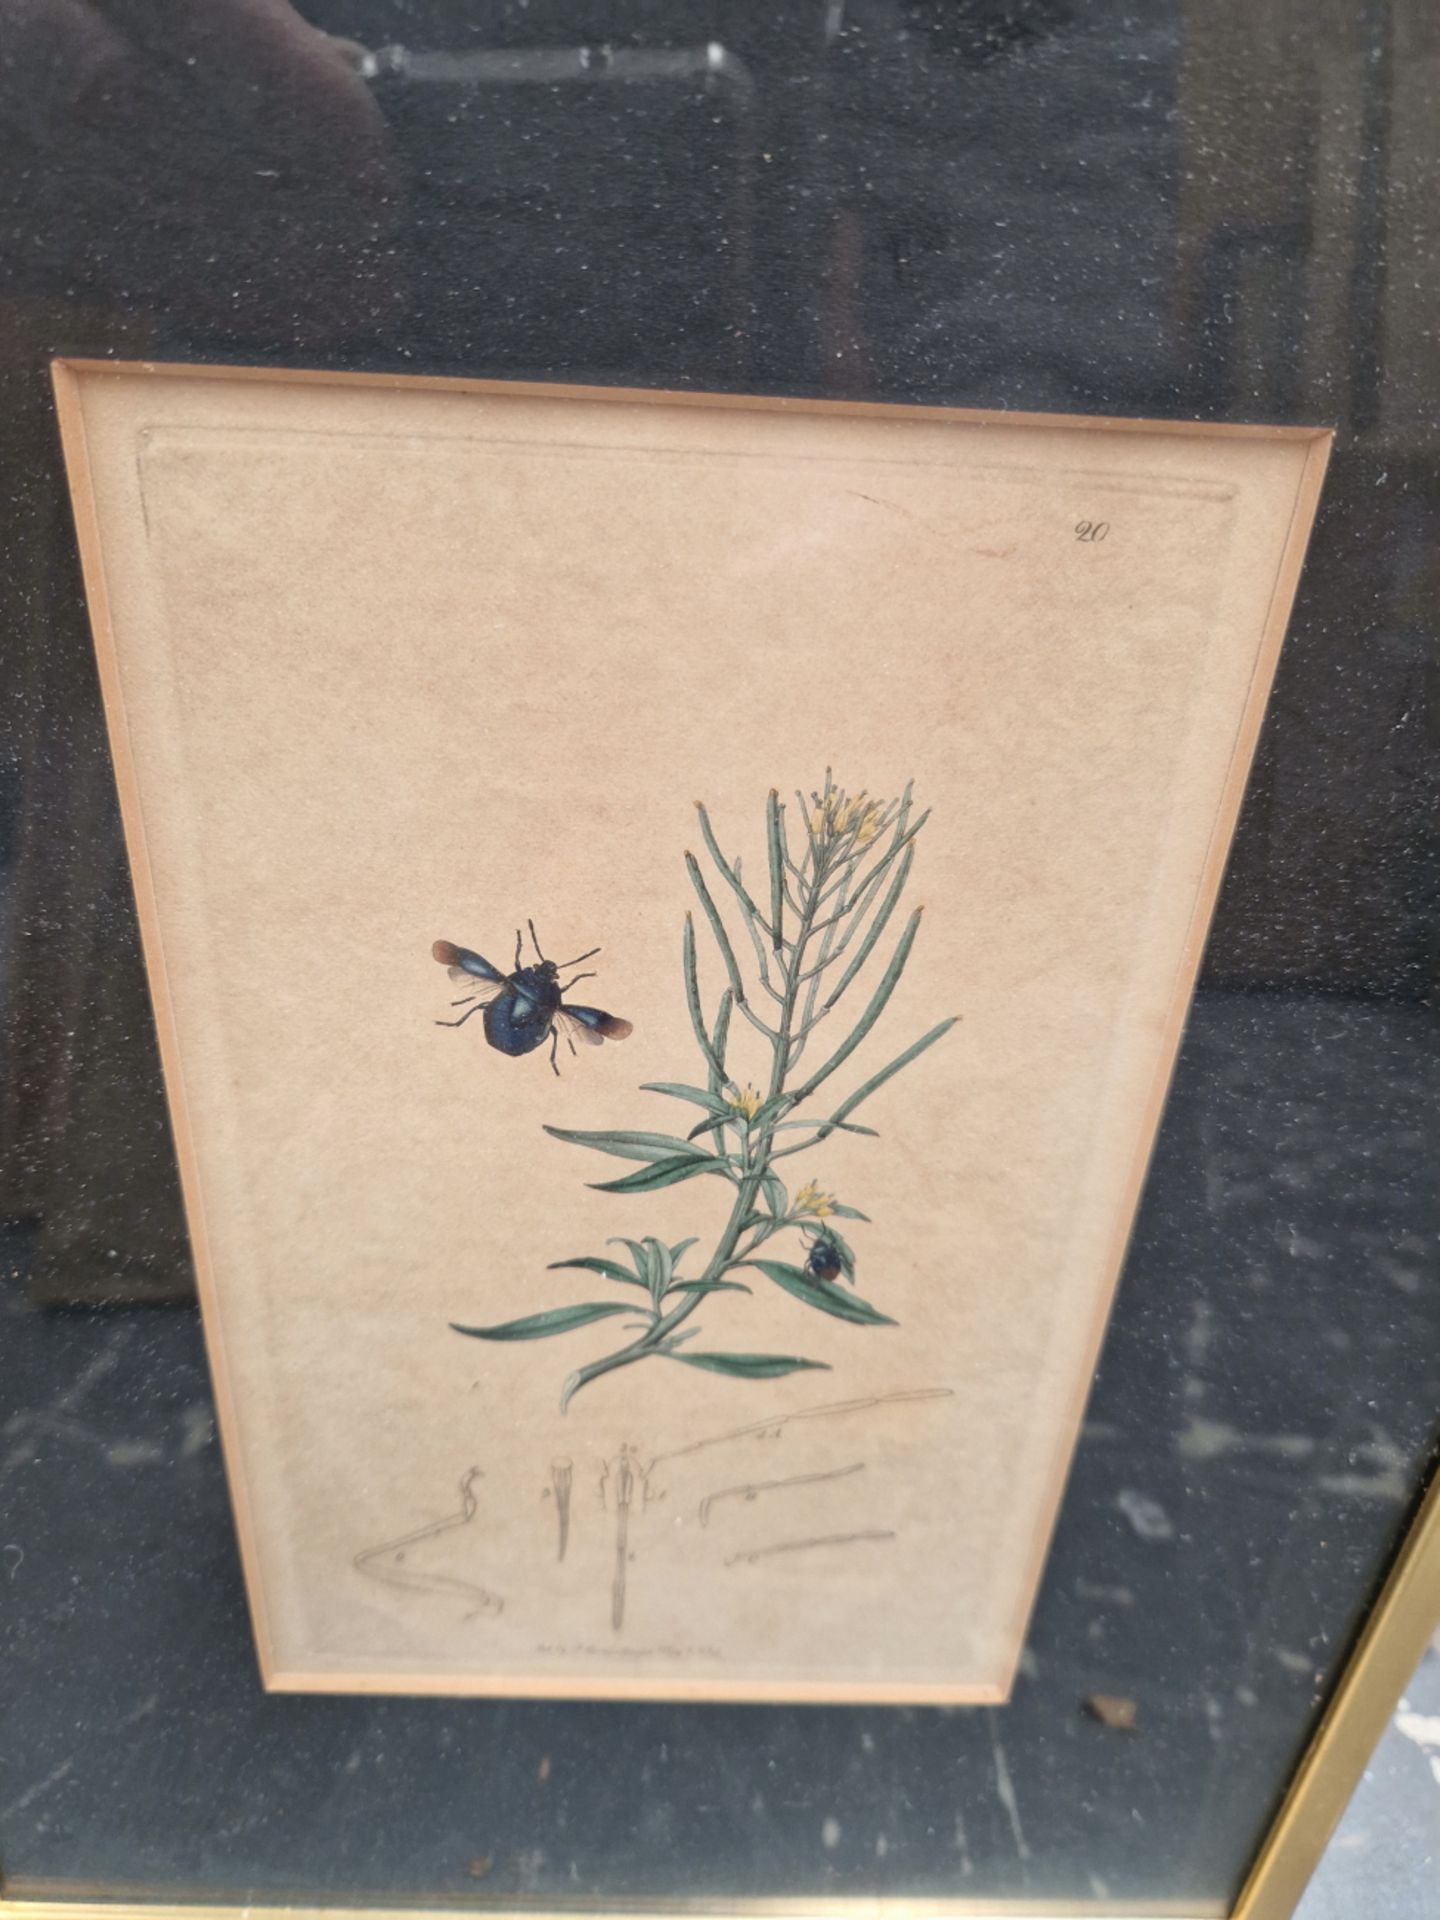 SIX 19th CENTURY HAND COLOURED BOTANICAL PRINTS, GILT FRAMES. TOGETHER WITH TWO WATERCOLOURS OF - Image 4 of 8